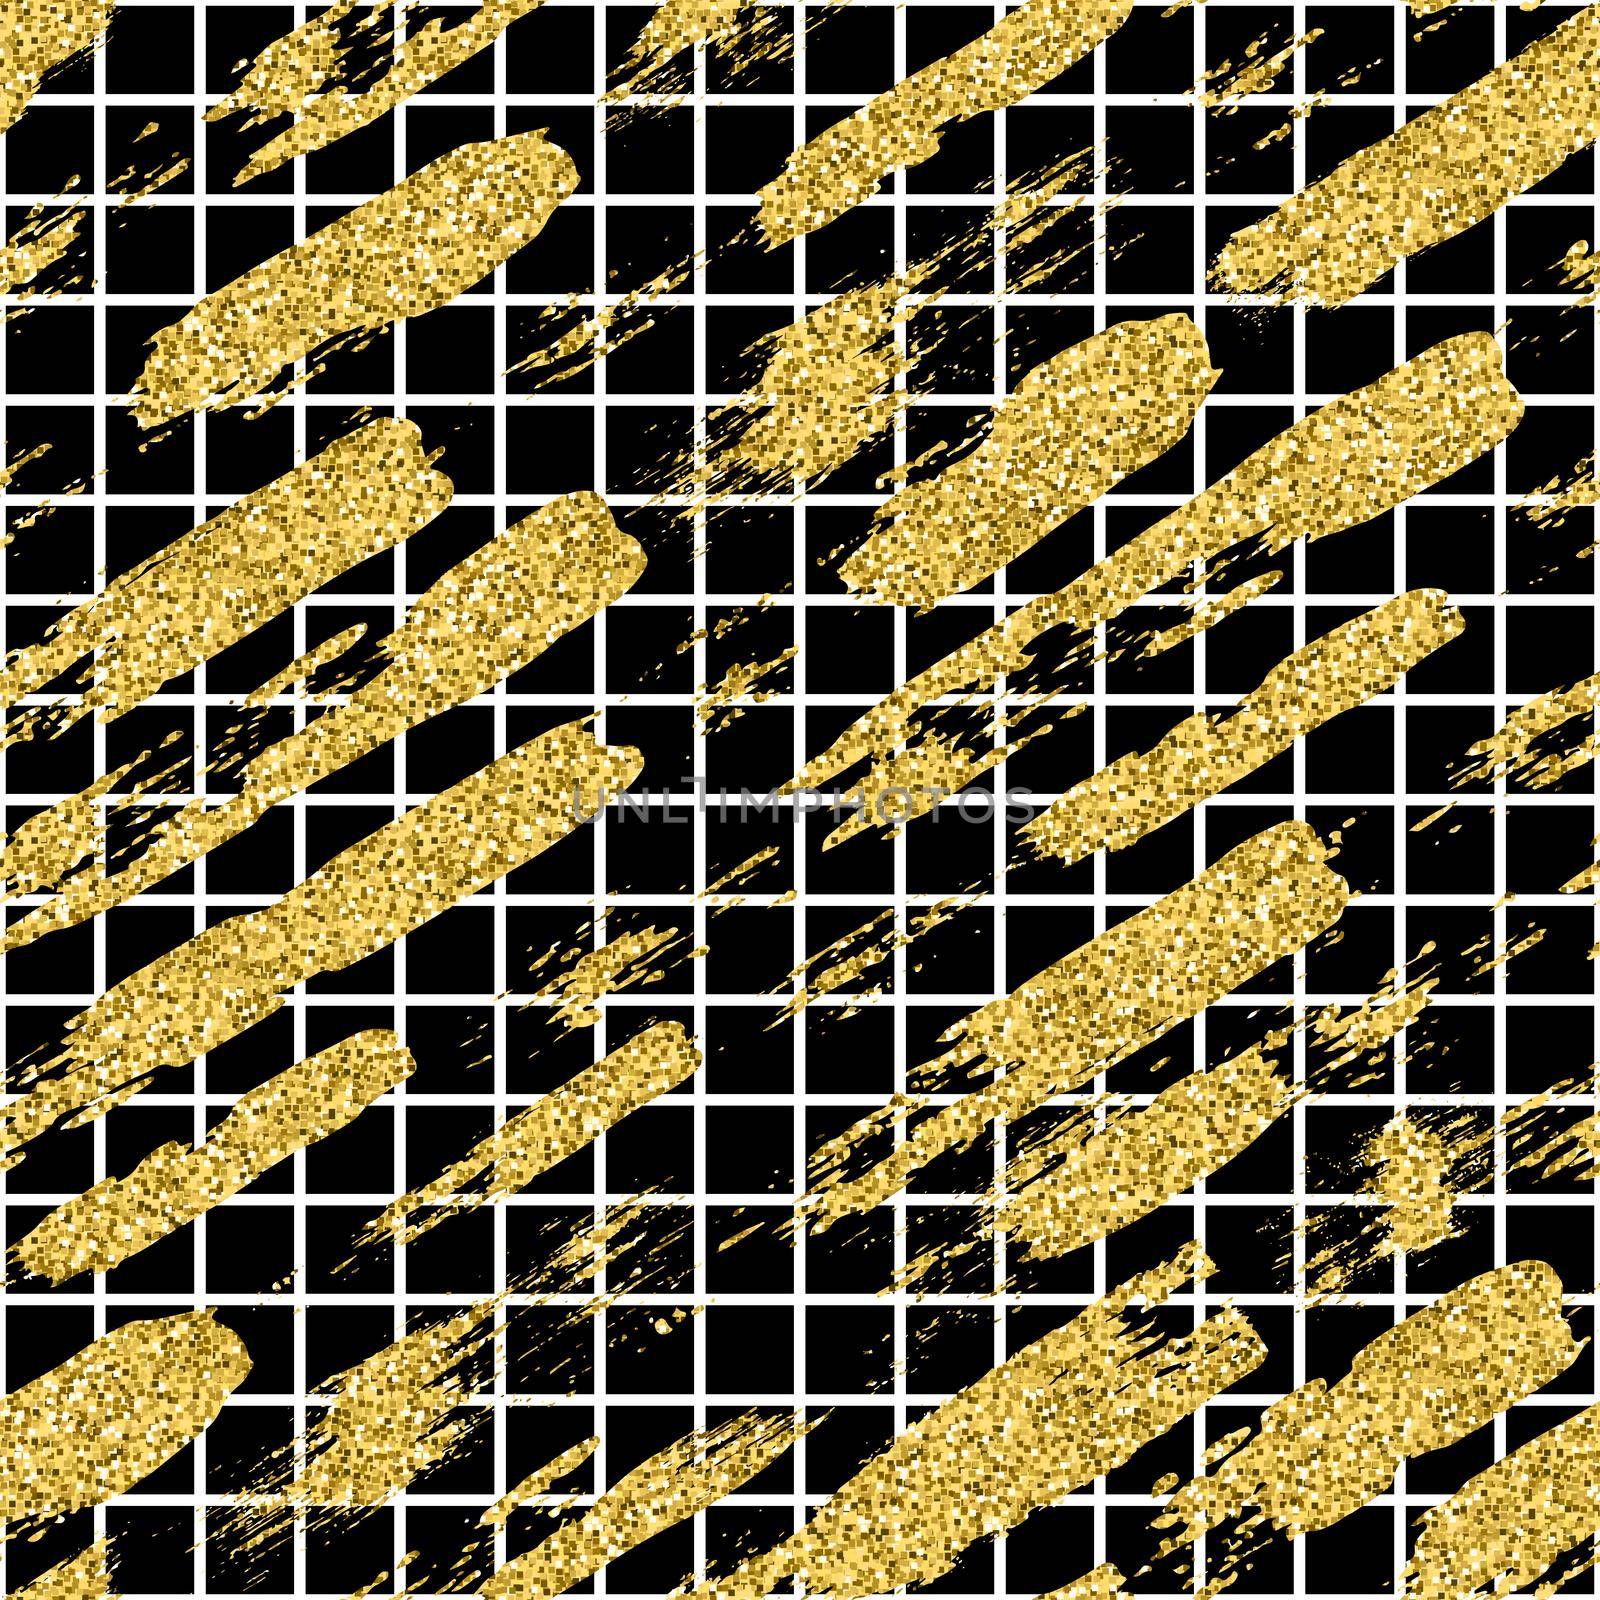 Modern seamless pattern with glitter brush stripes and strokes. Golden, white color on black background. Hand painted grange texture. Shiny spark elements. Fashion modern style. Repeat fabric print. by DesignAB